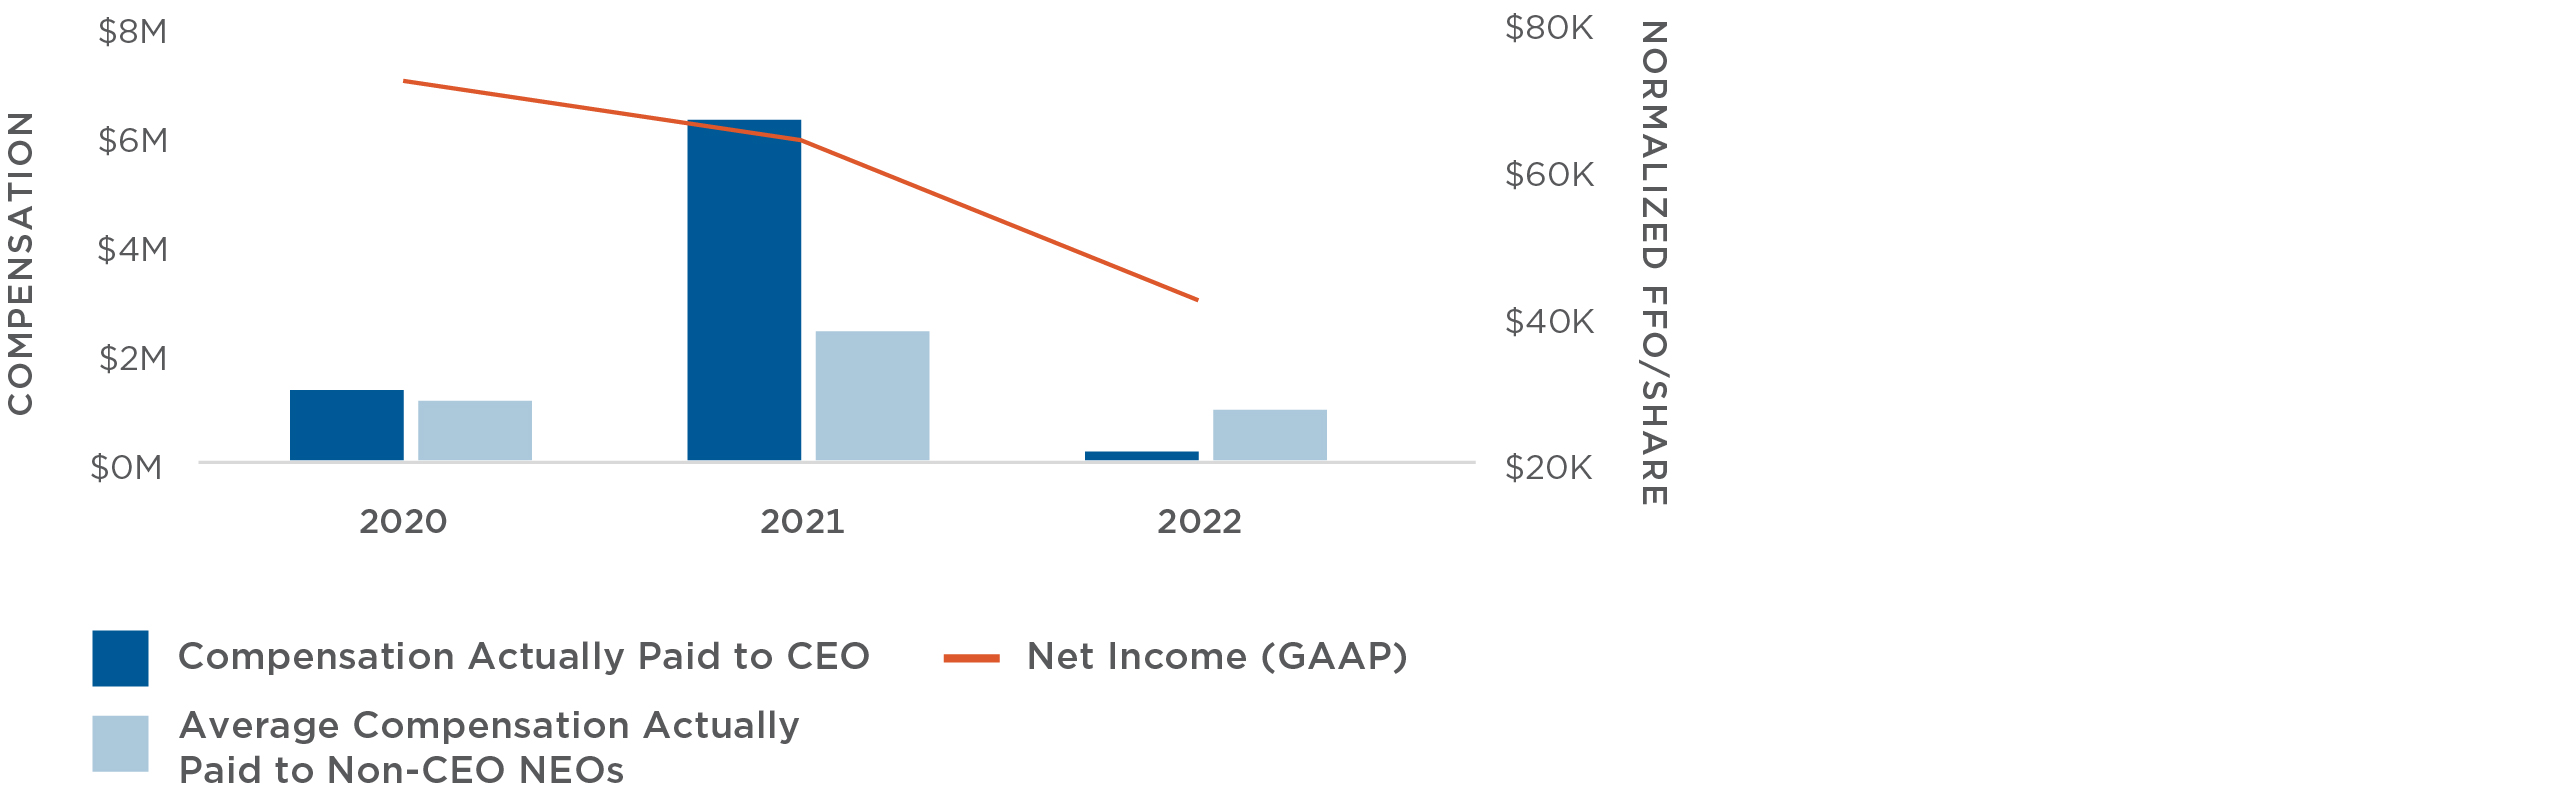 Proxy - Graphs - Q4 2022_CEO AND NEO - GAAP.jpg